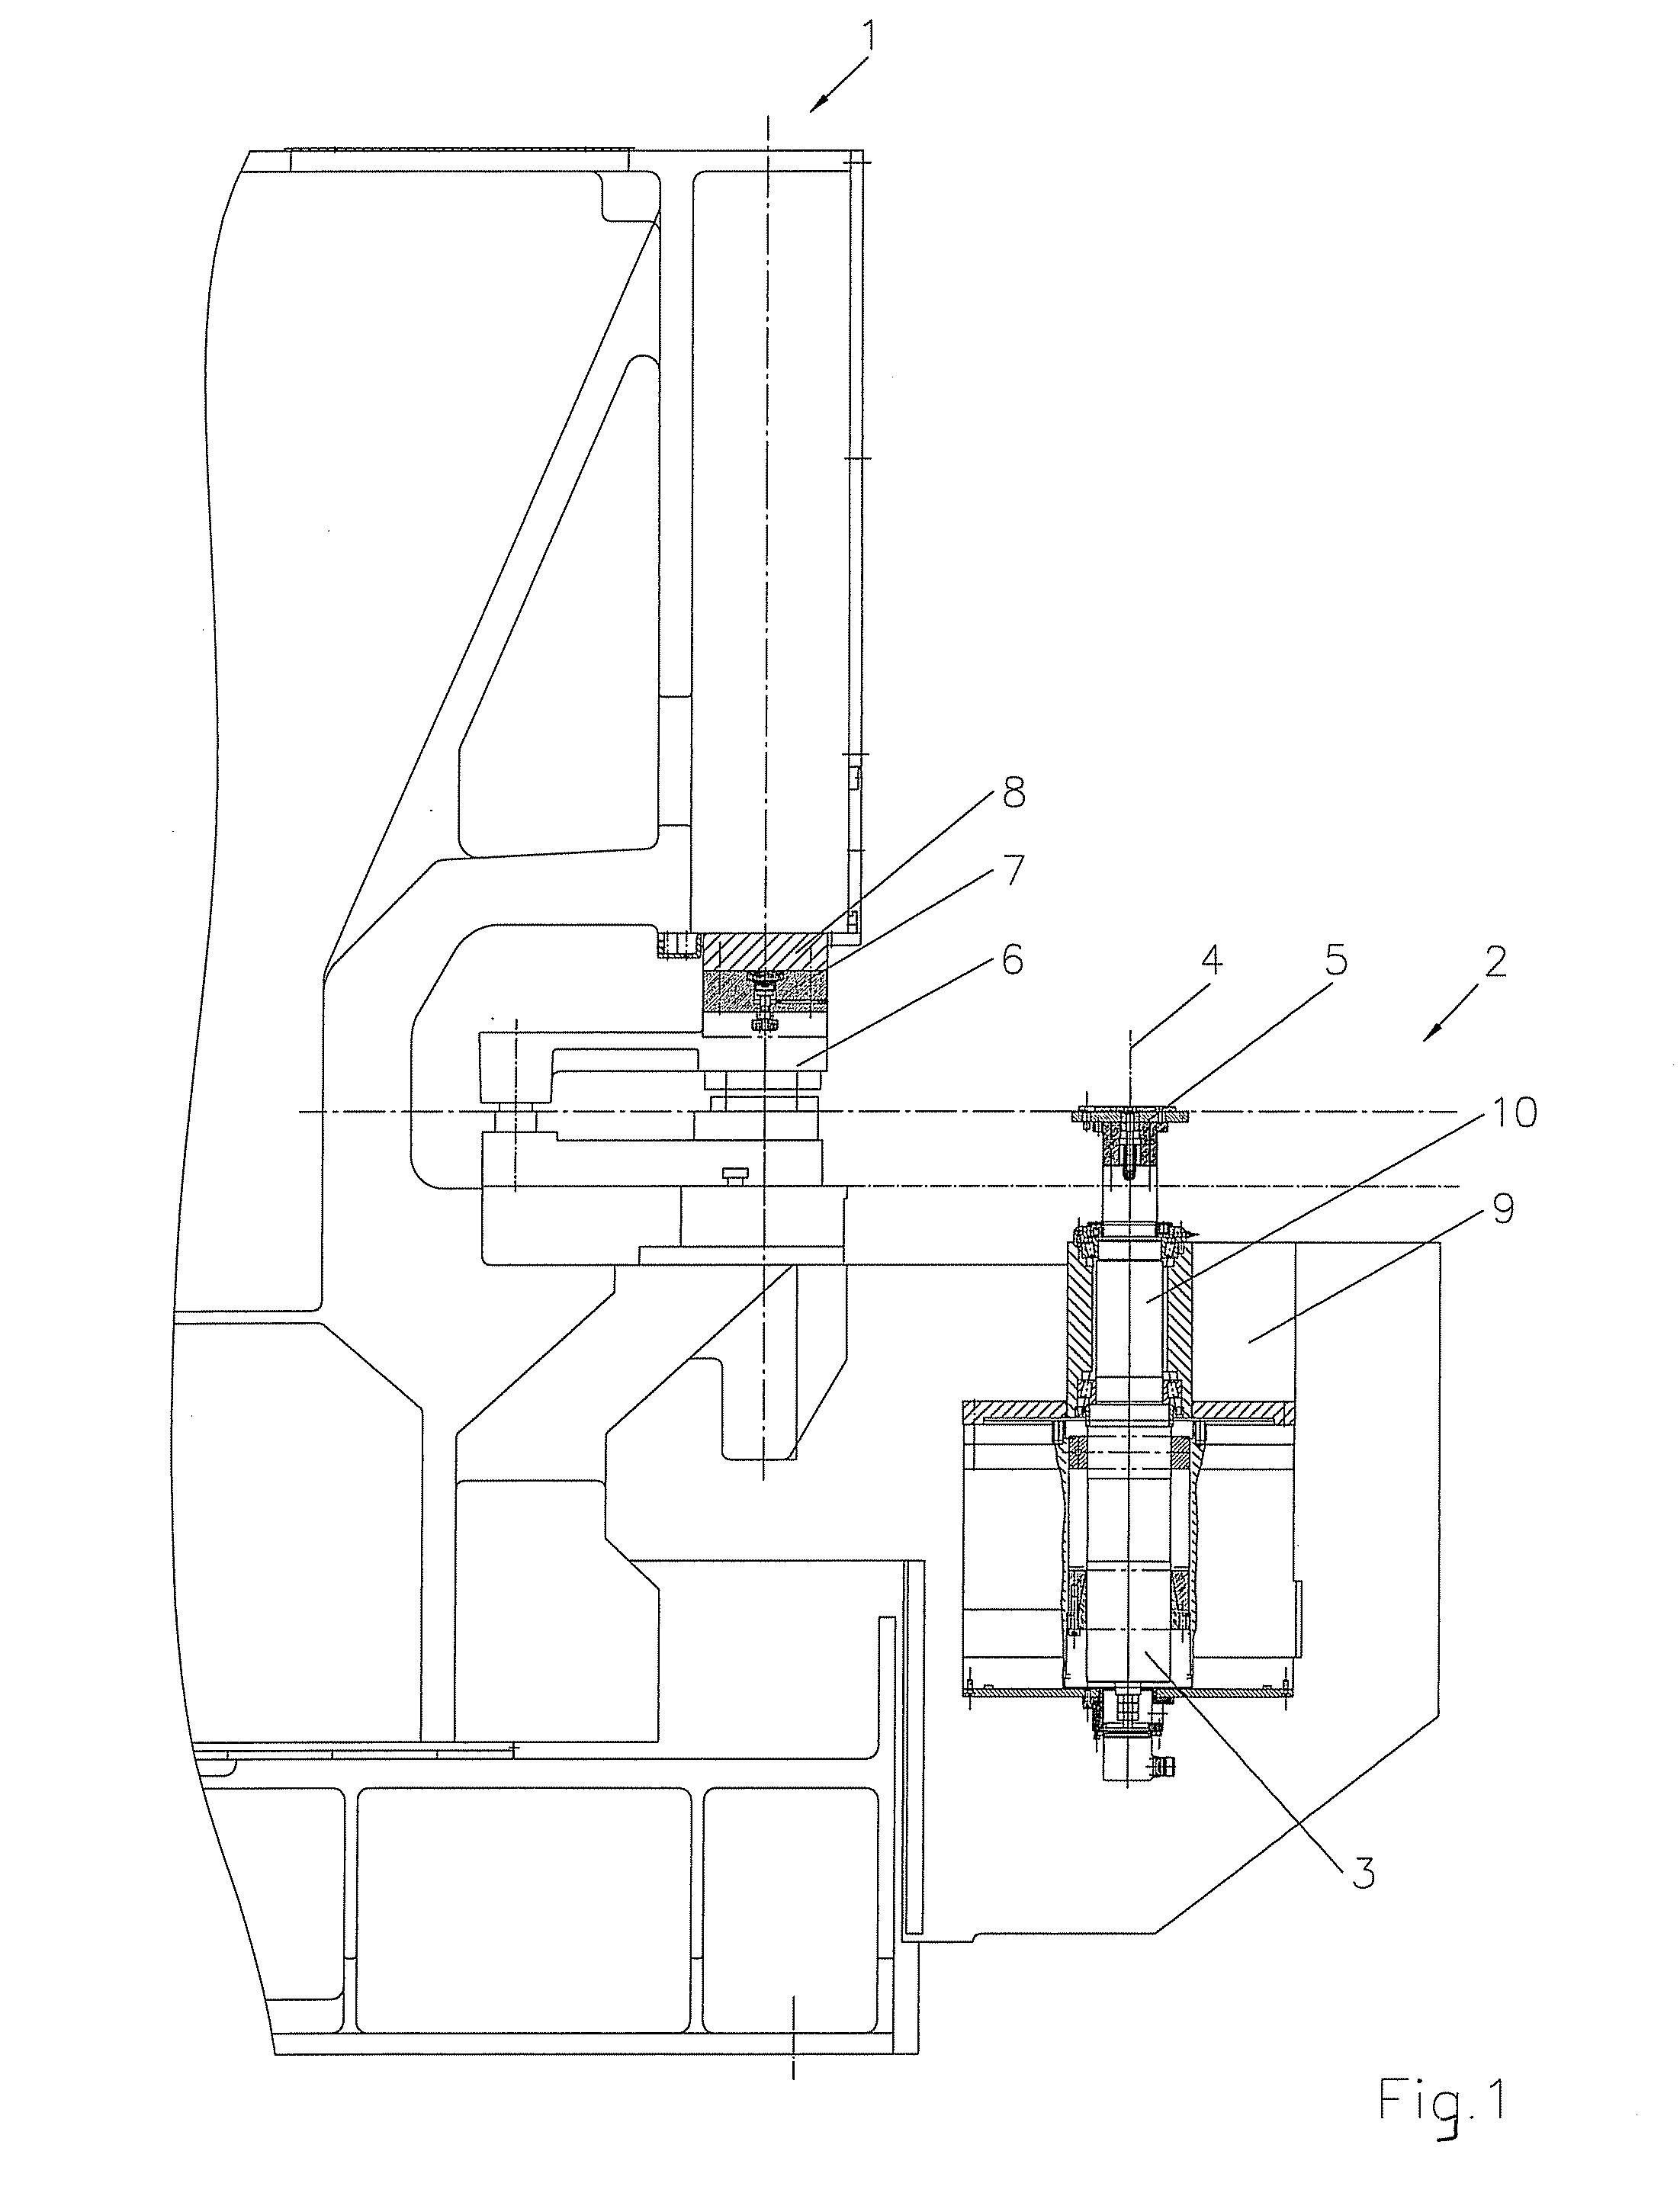 Dividing apparatus for automatic notching presses with a direct drive